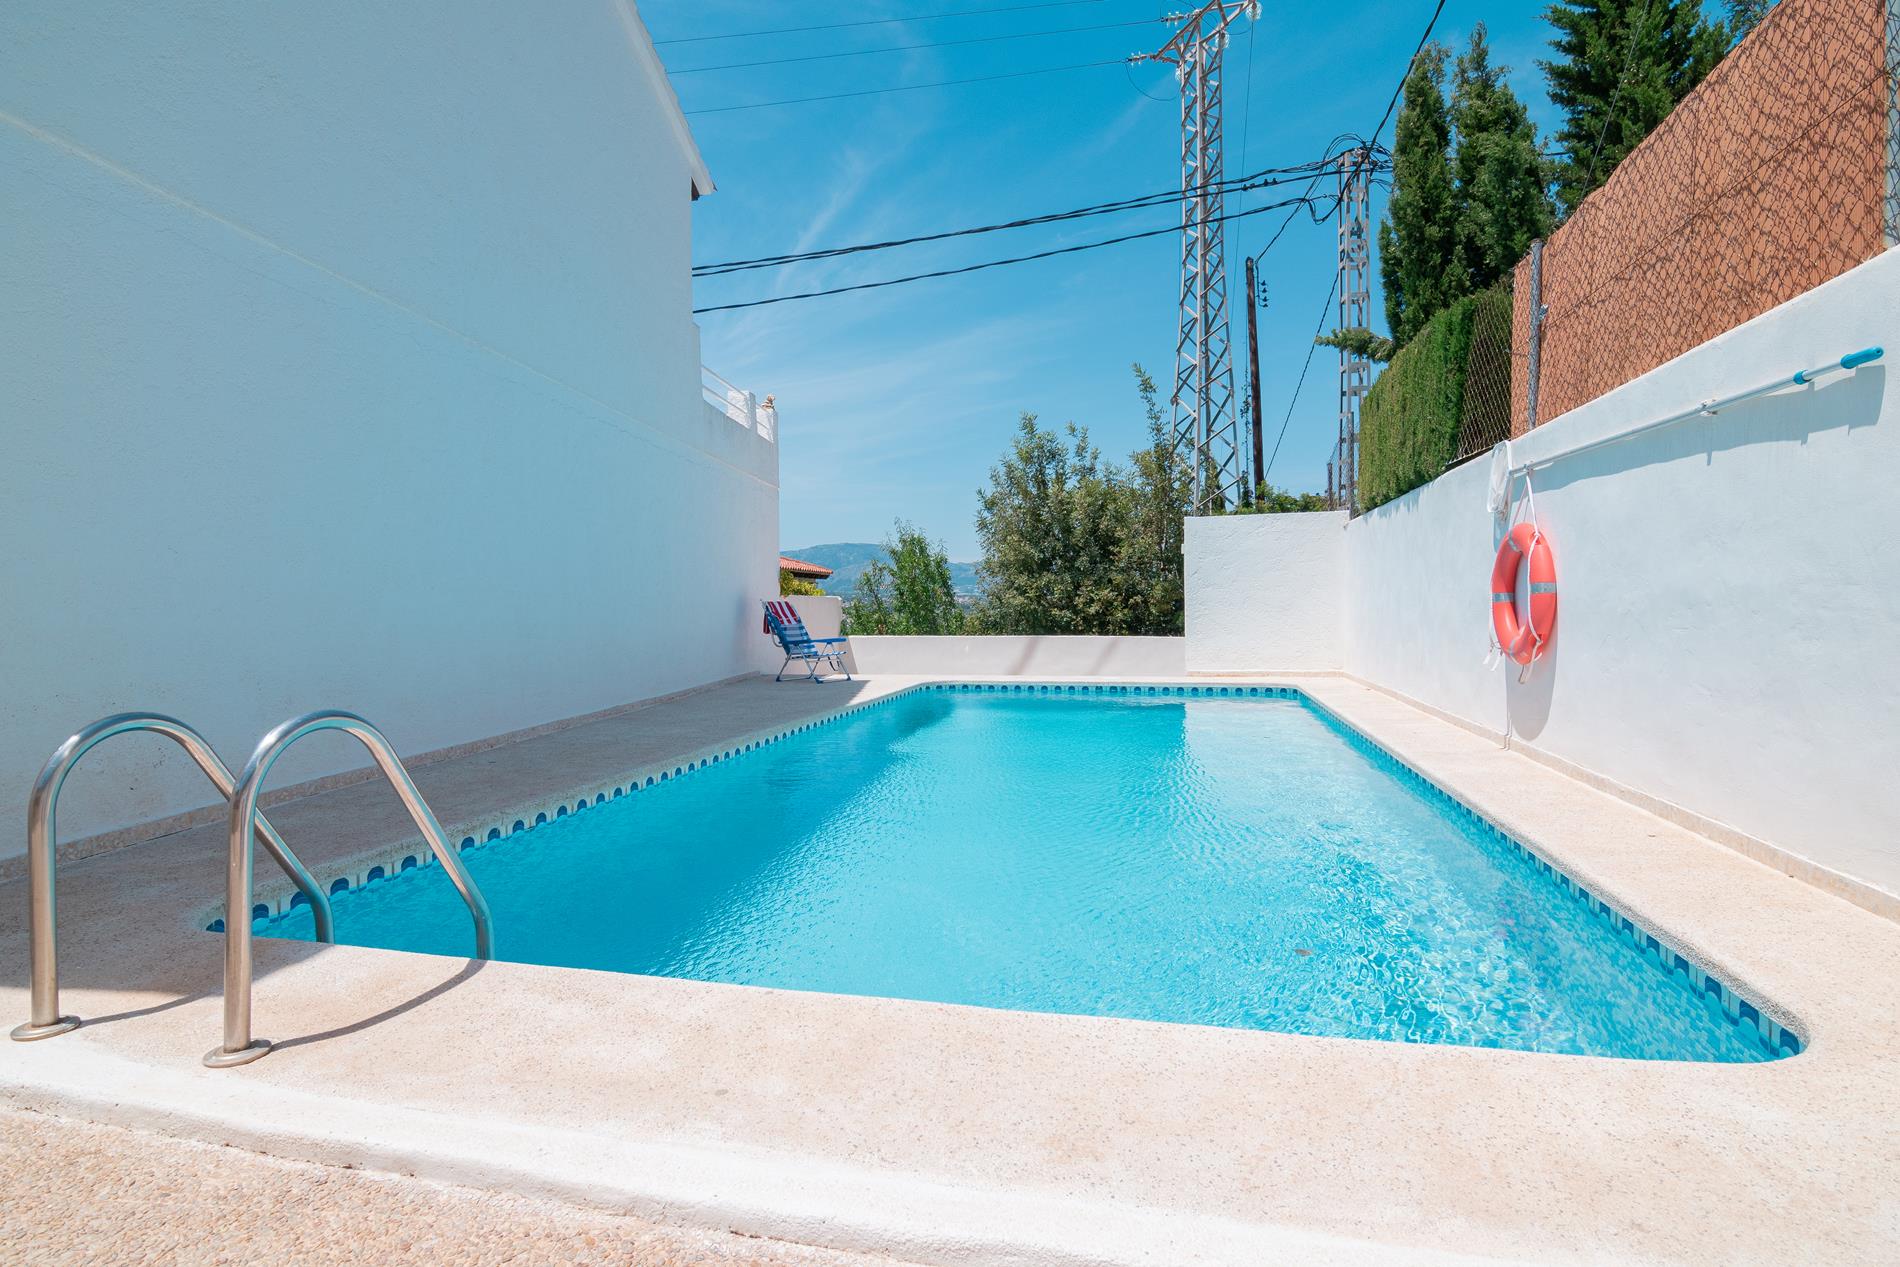 Bungalow for sale in Albir, in urbanization with pool